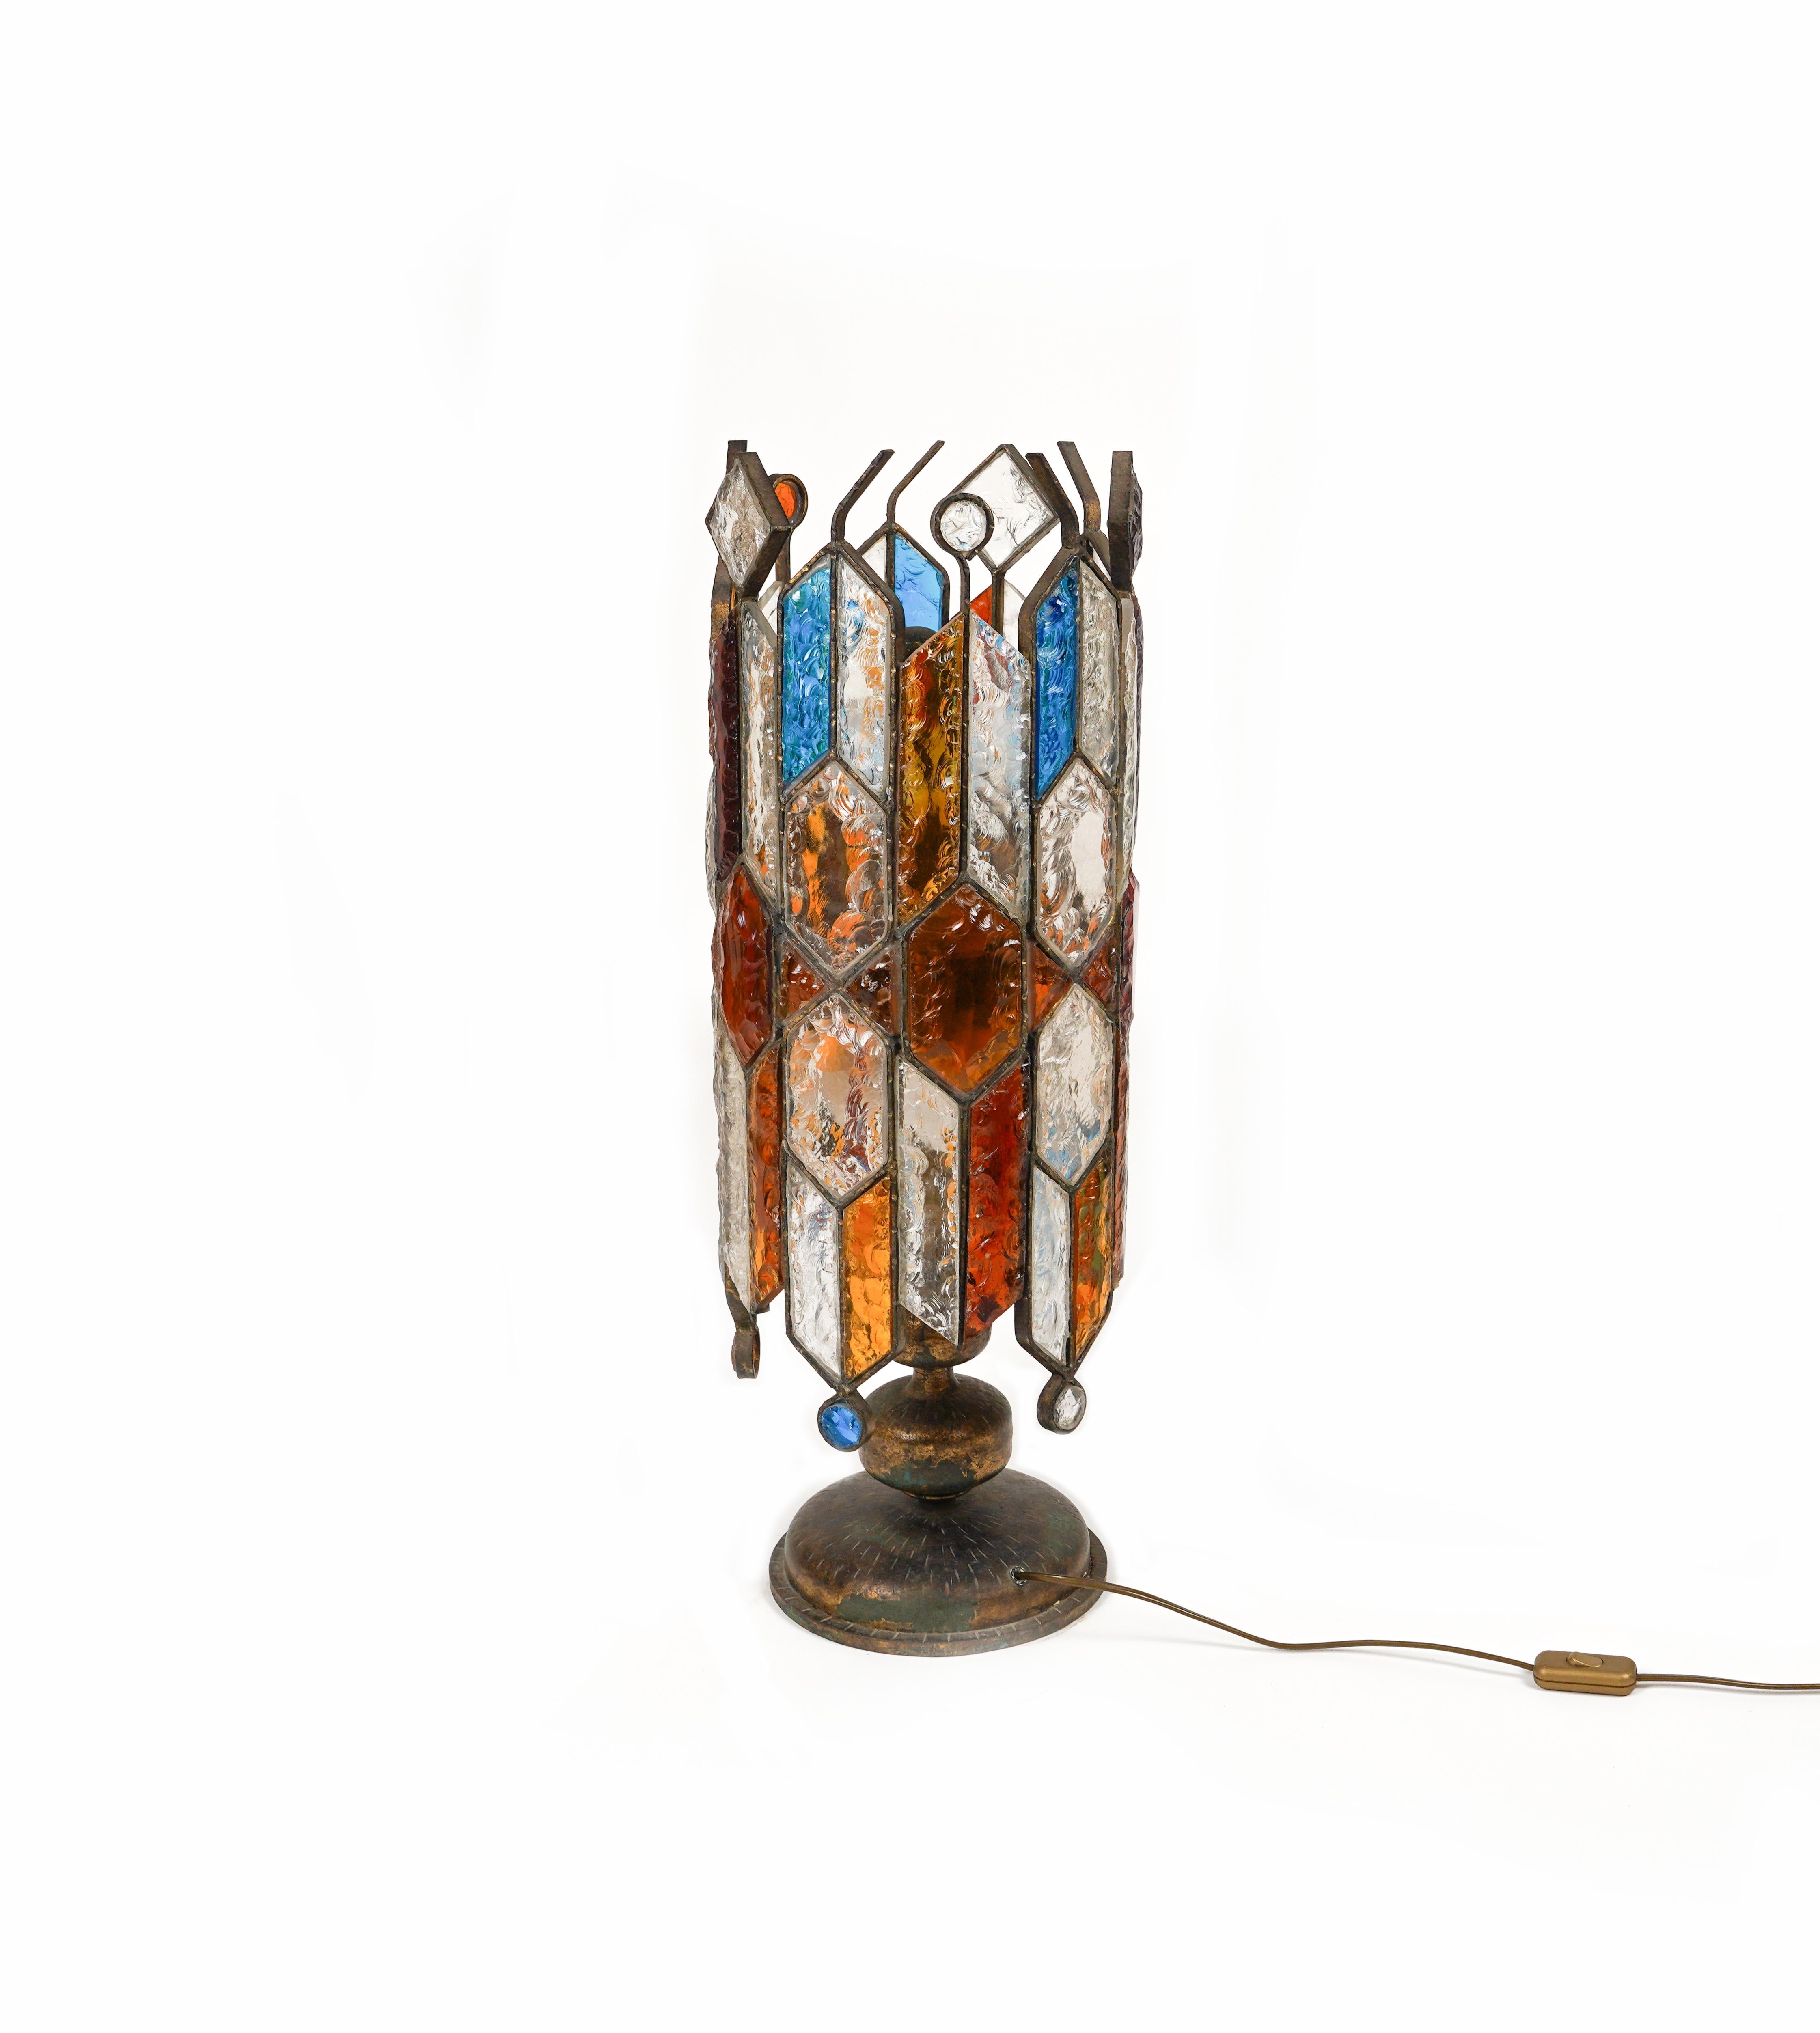 Metal Table or Floor Lamp Wrought Iron and Hammered Glass by Longobard, Italy, 1970s For Sale